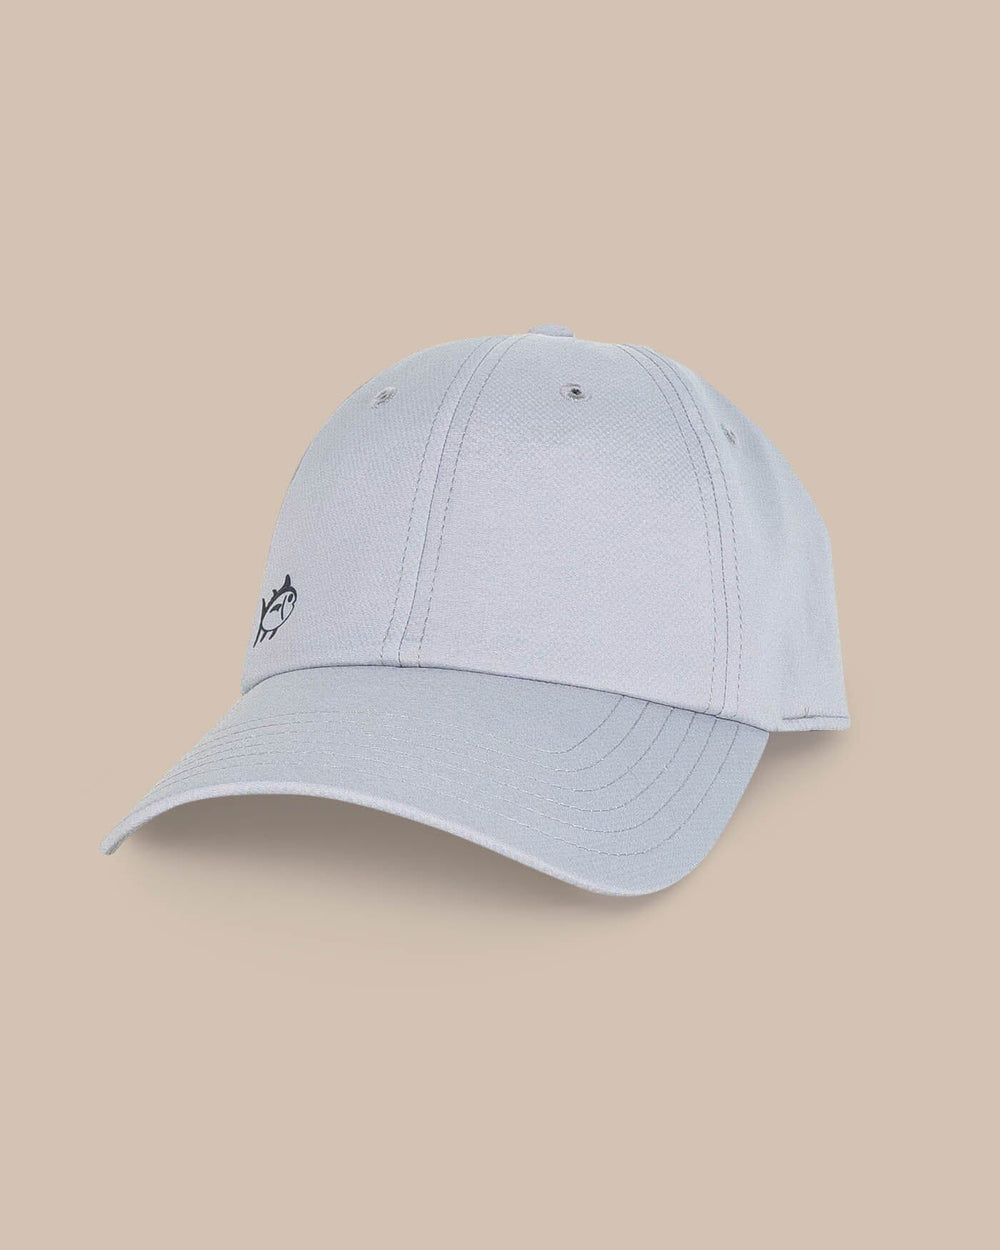 The front view of the Southern Tide Rubber Skipjack Performance Hat by Southern Tide - Steel Grey